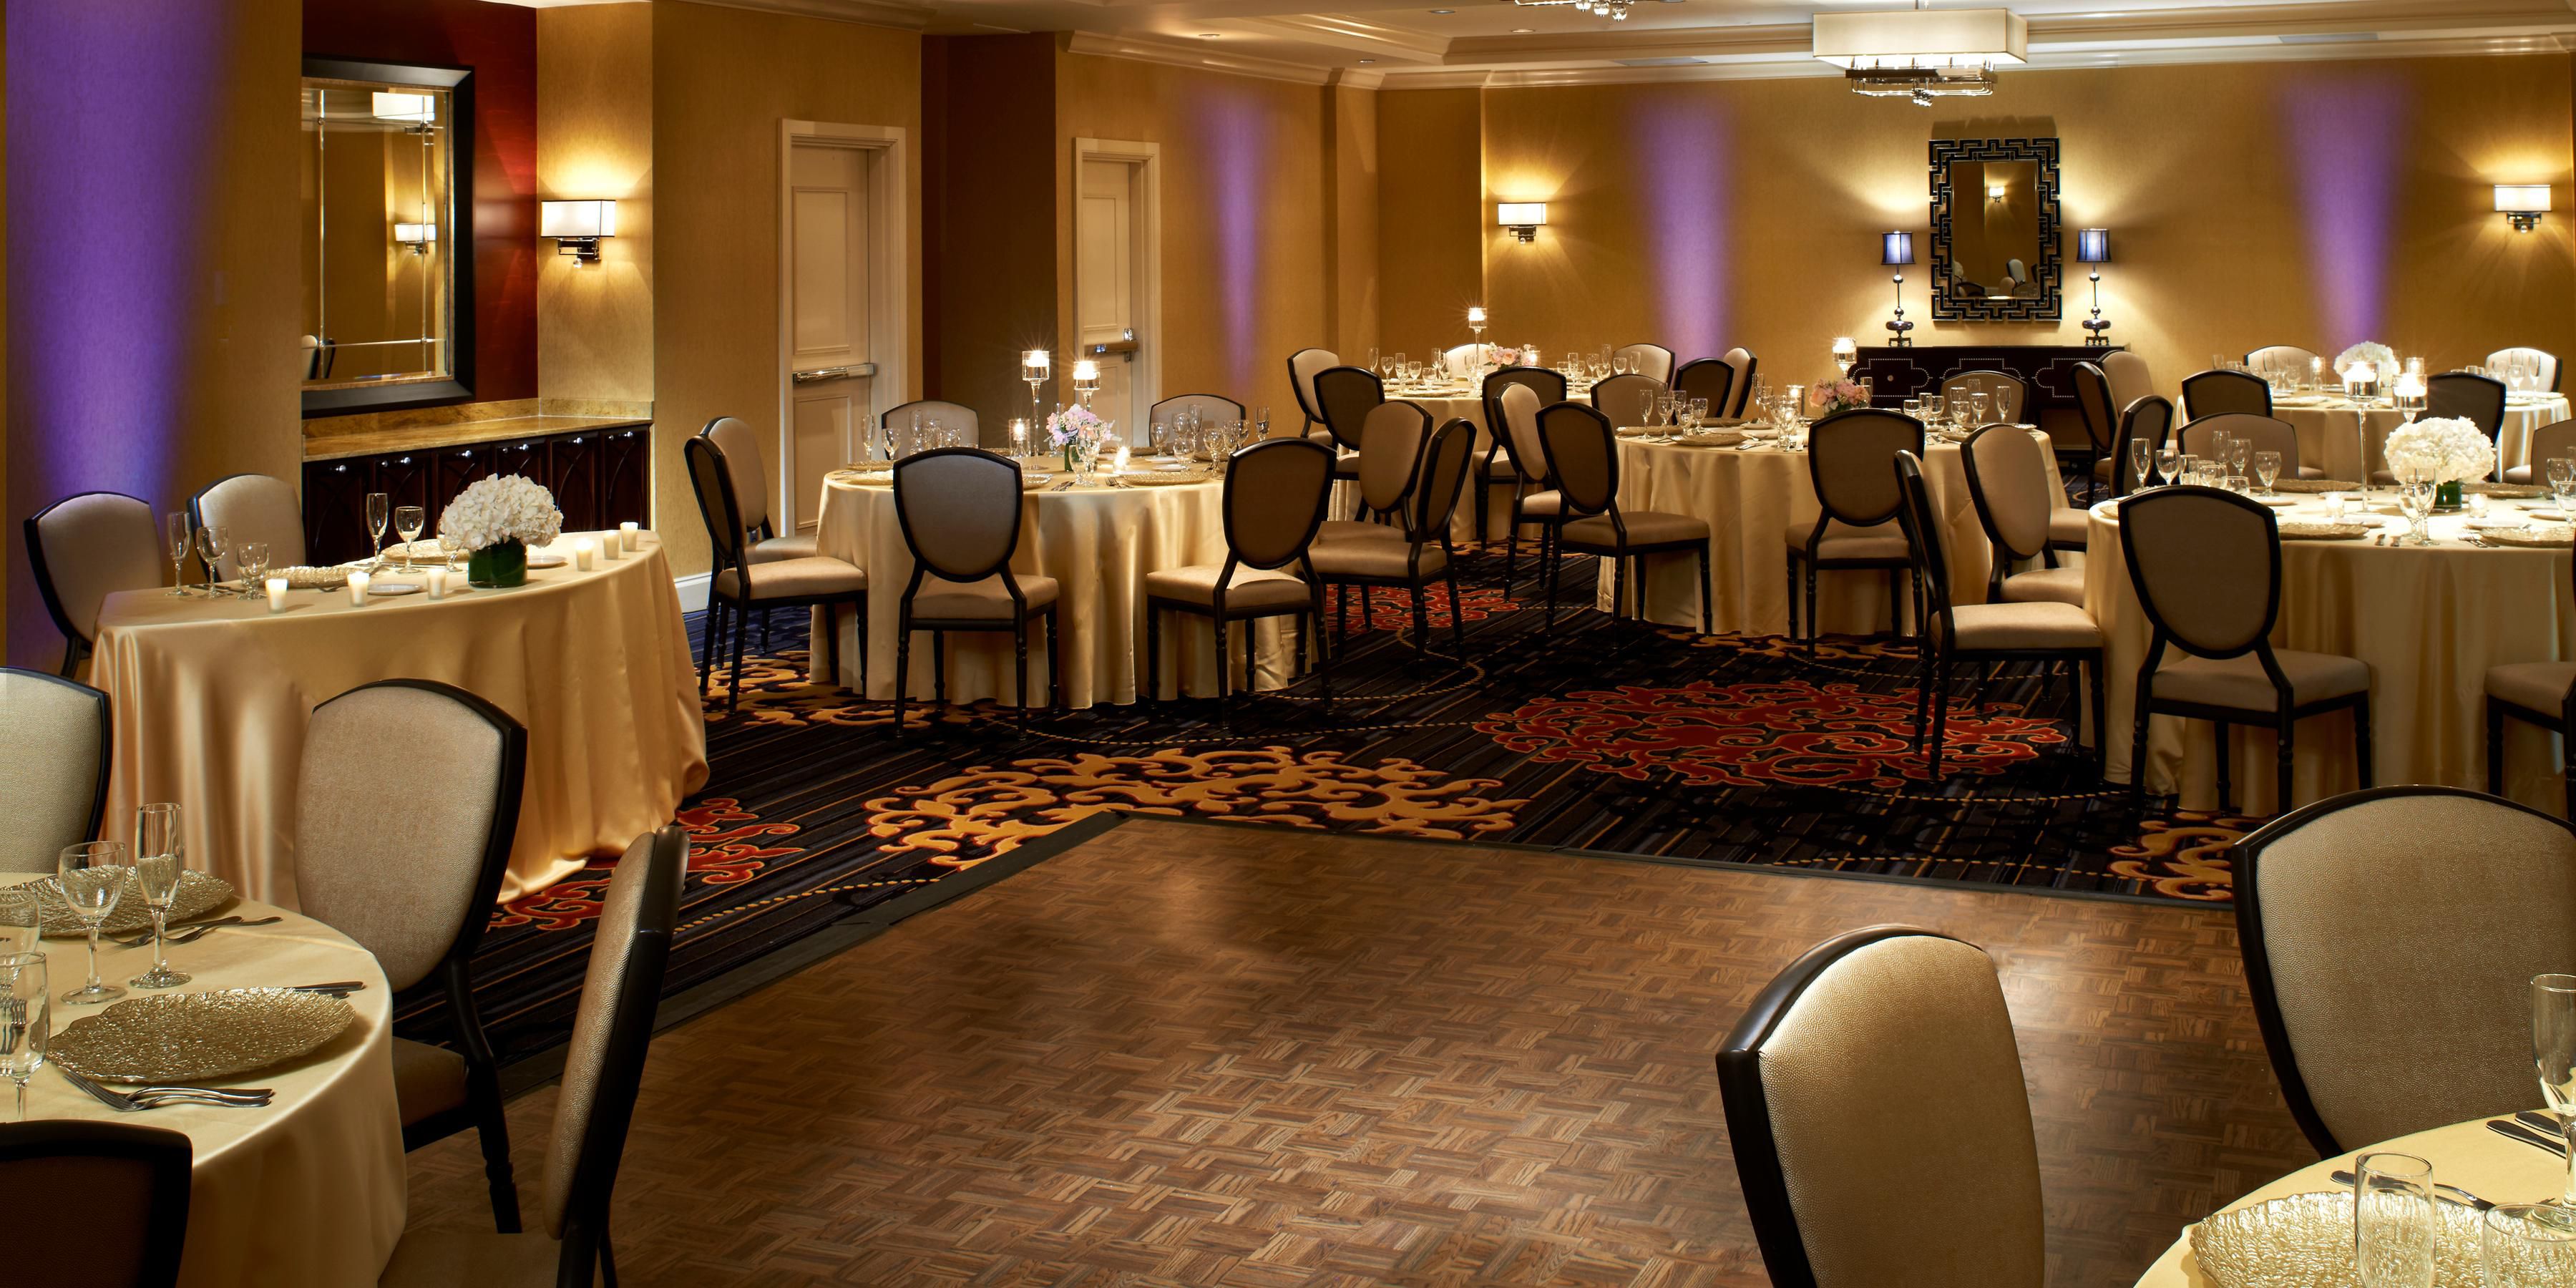 With a sought after downtown Chicago location, completely personalized service, and beautiful, historic 1912 building, Kimpton Hotel Monaco is perfect for your big day! We can host dinners for up to 190 guests and receptions for 300. And don't forget about rehearsal dinners and farewell brunches.